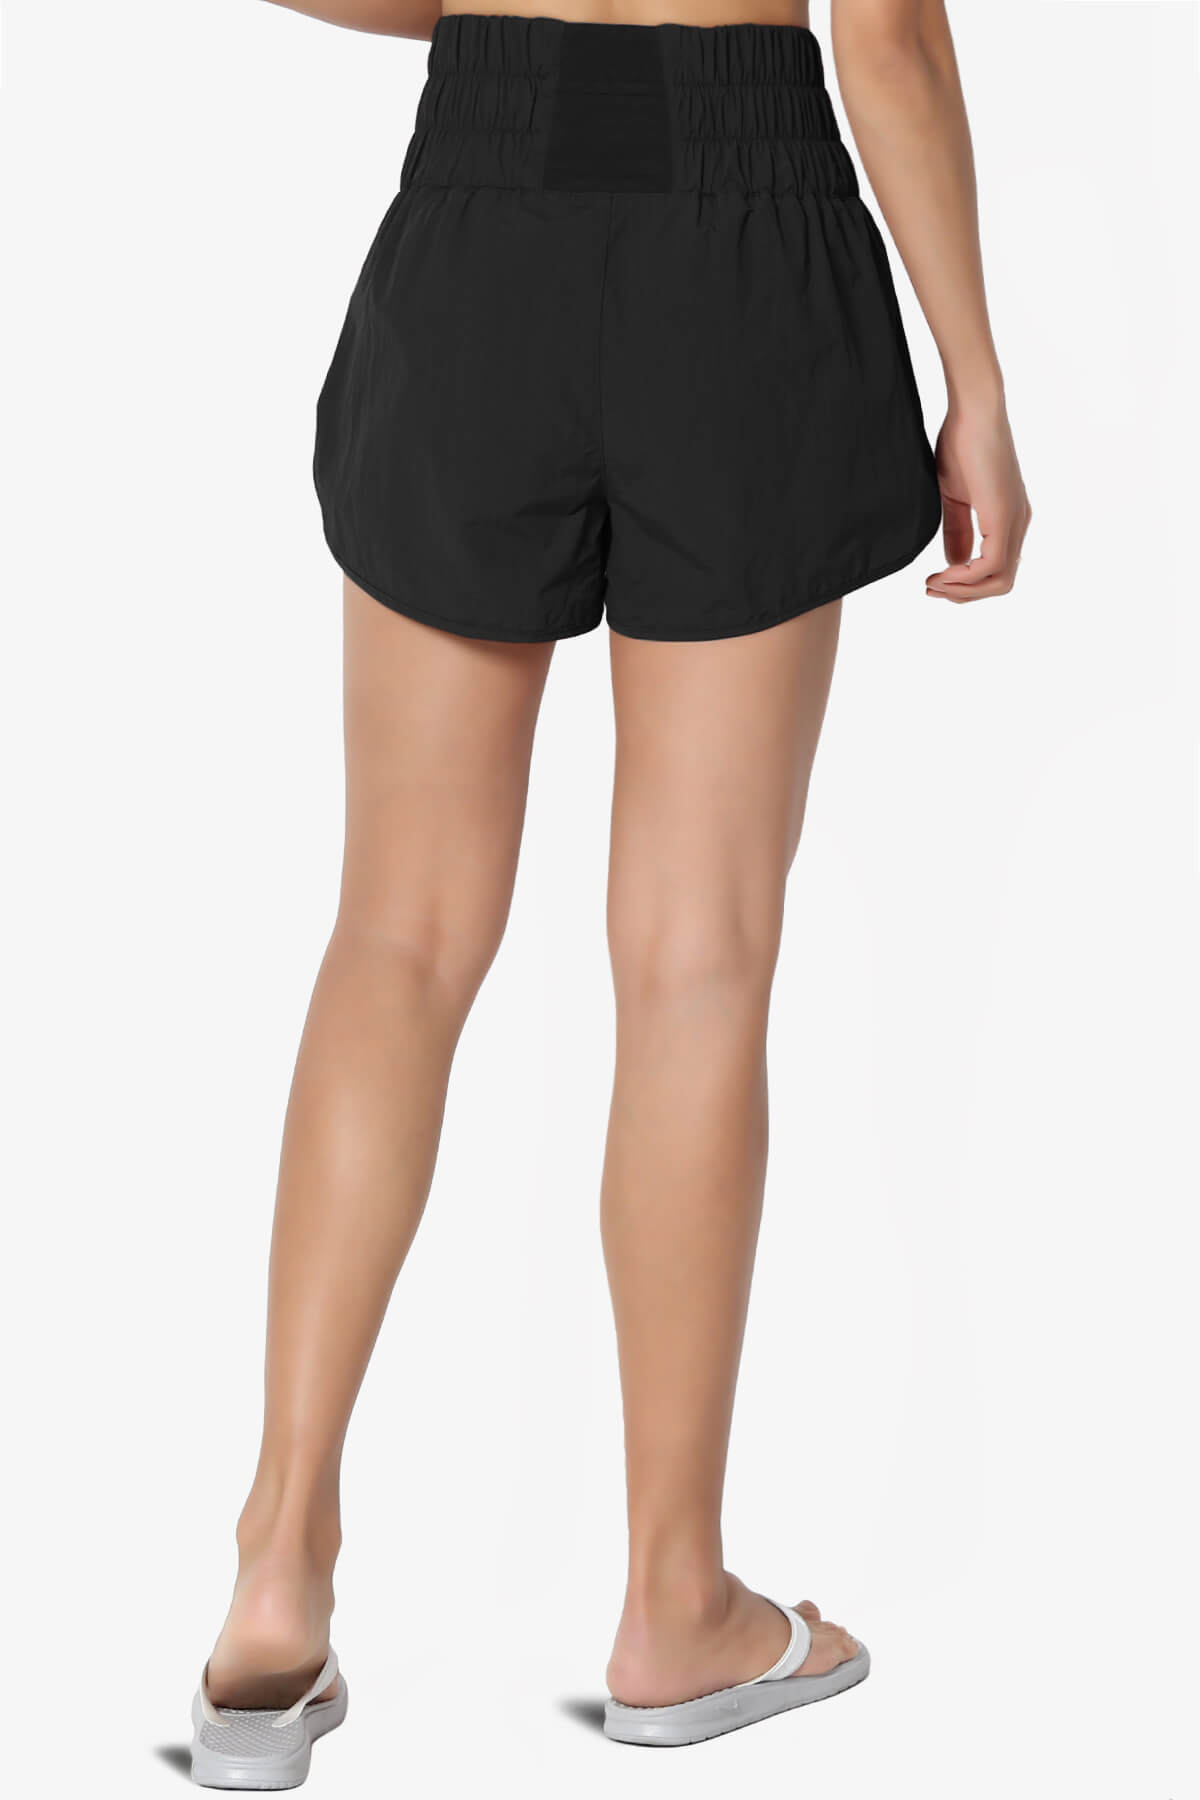 Load image into Gallery viewer, The Way Home Running Shorts BLACK_2
